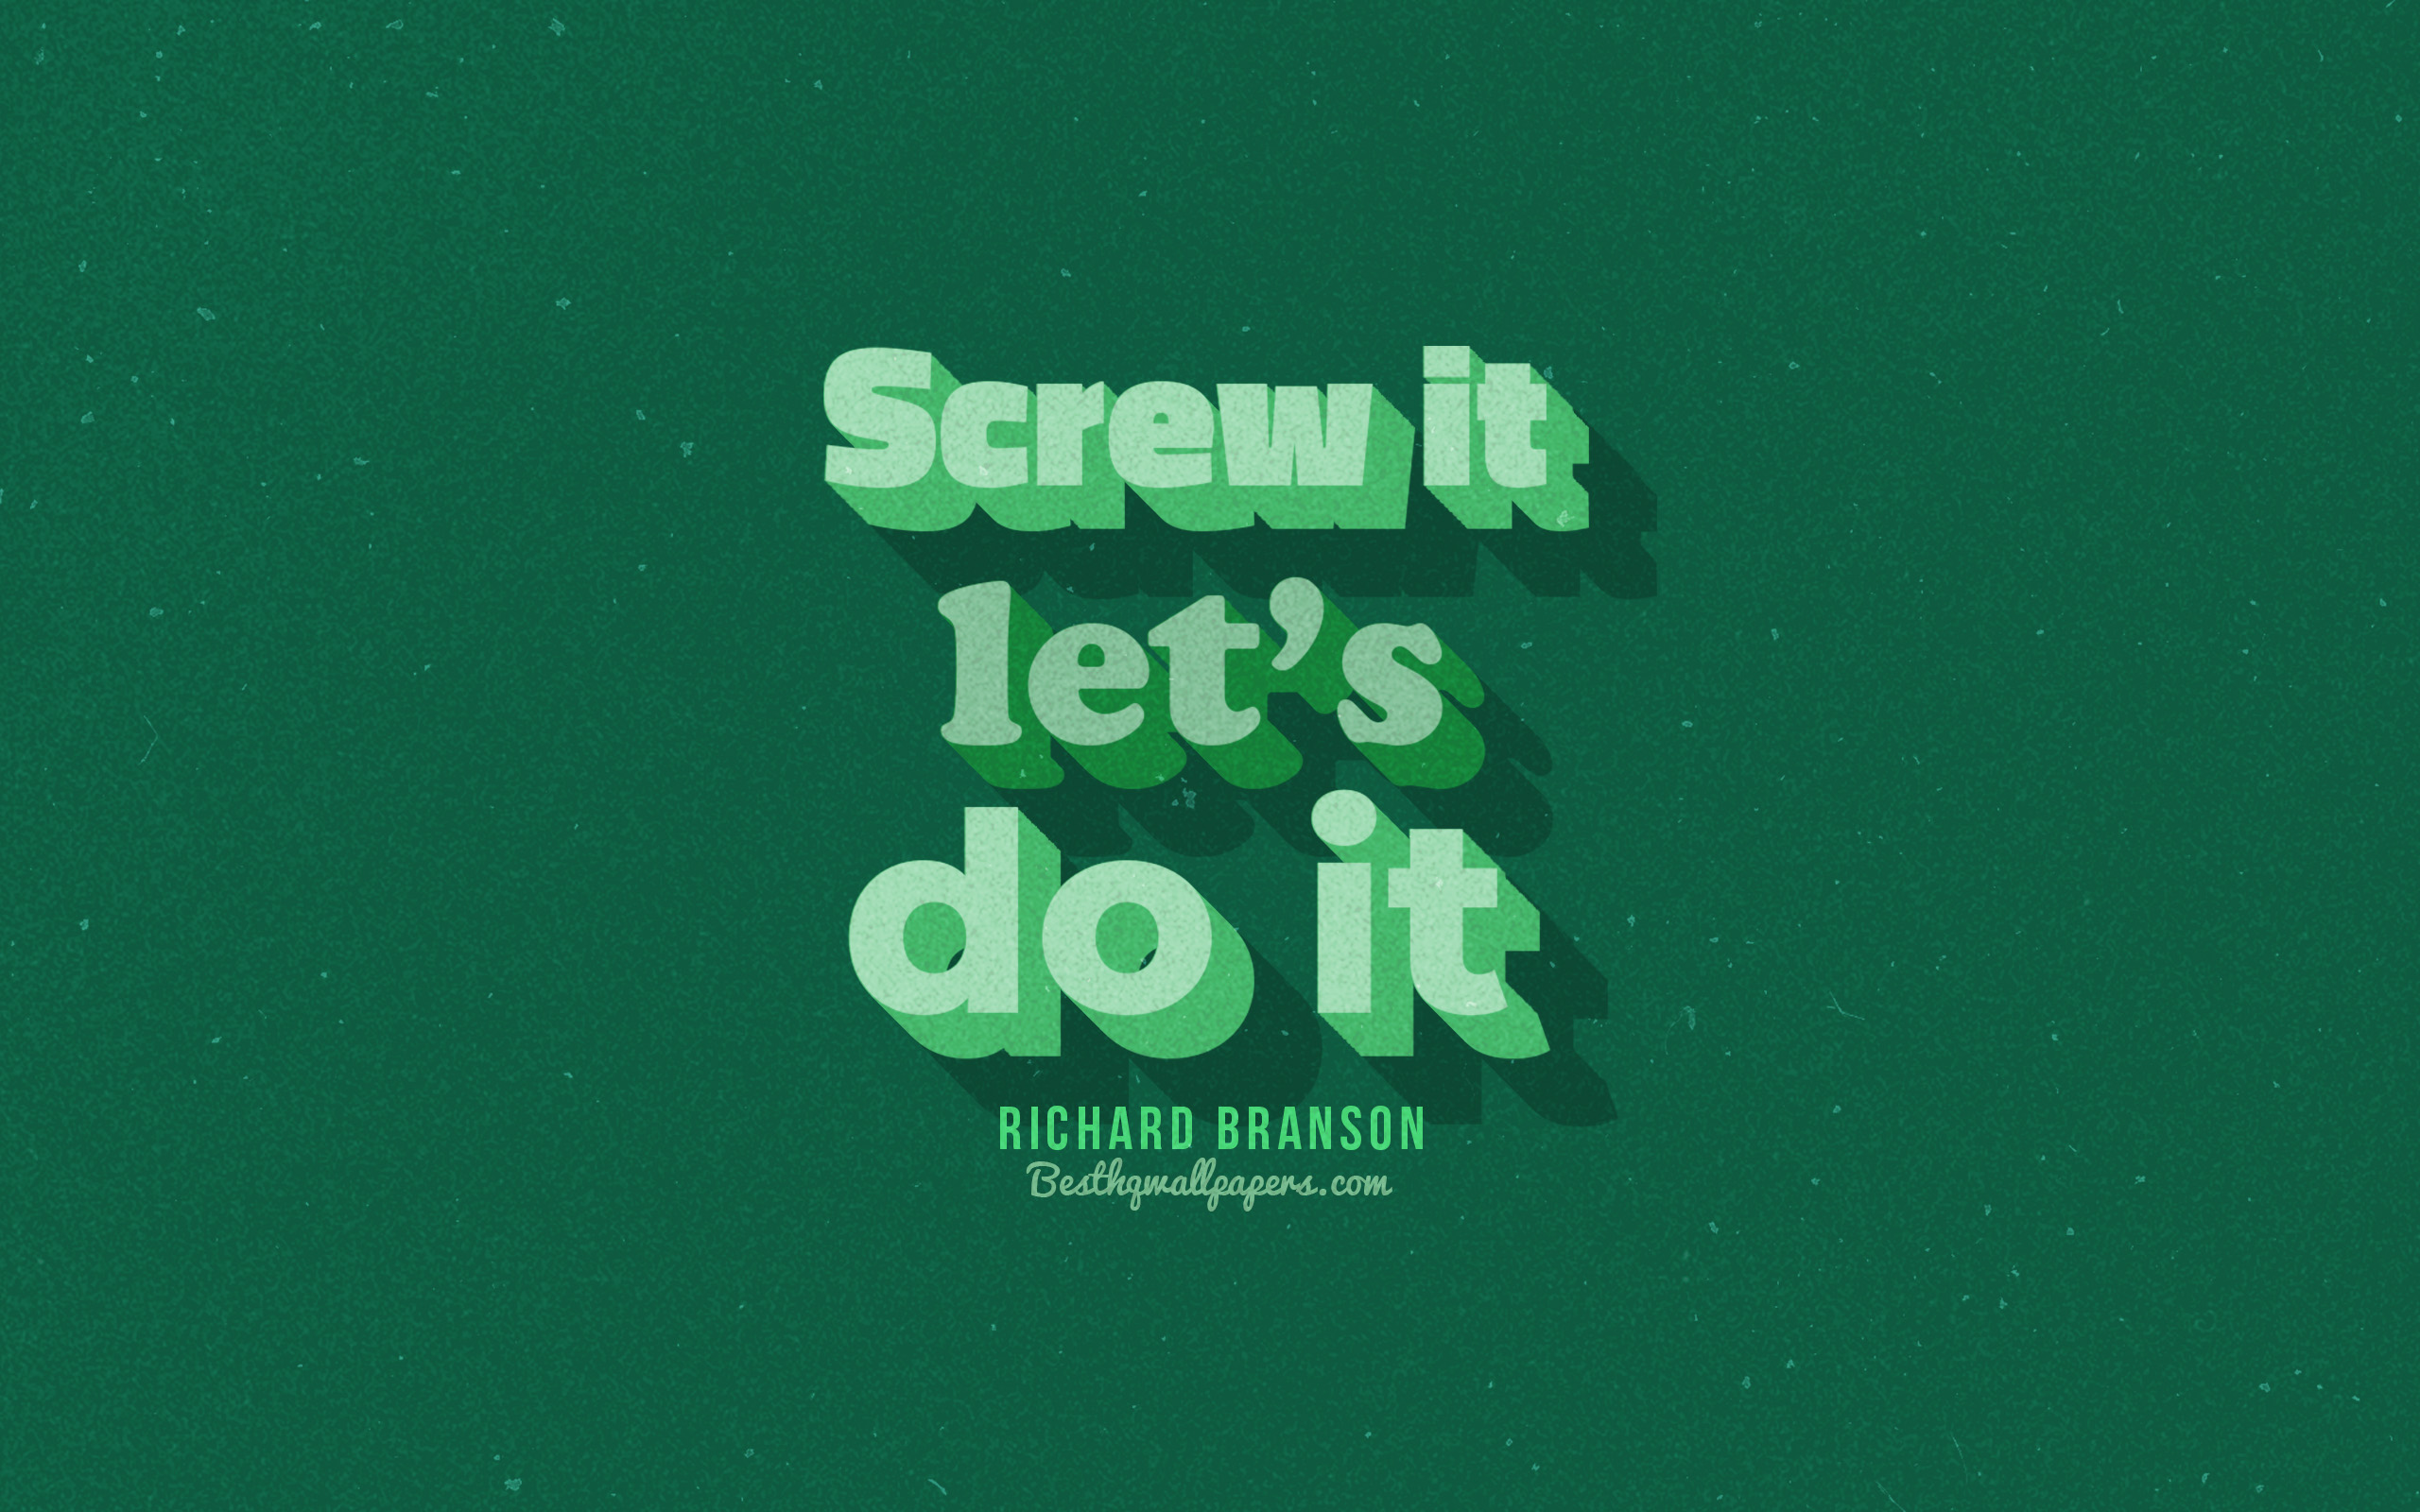 Download wallpaper Screw it lets do it, green background, Richard Branson Quotes, retro text, quotes, inspiration, Richard Branson, quotes about motivation for desktop with resolution 2560x1600. High Quality HD picture wallpaper